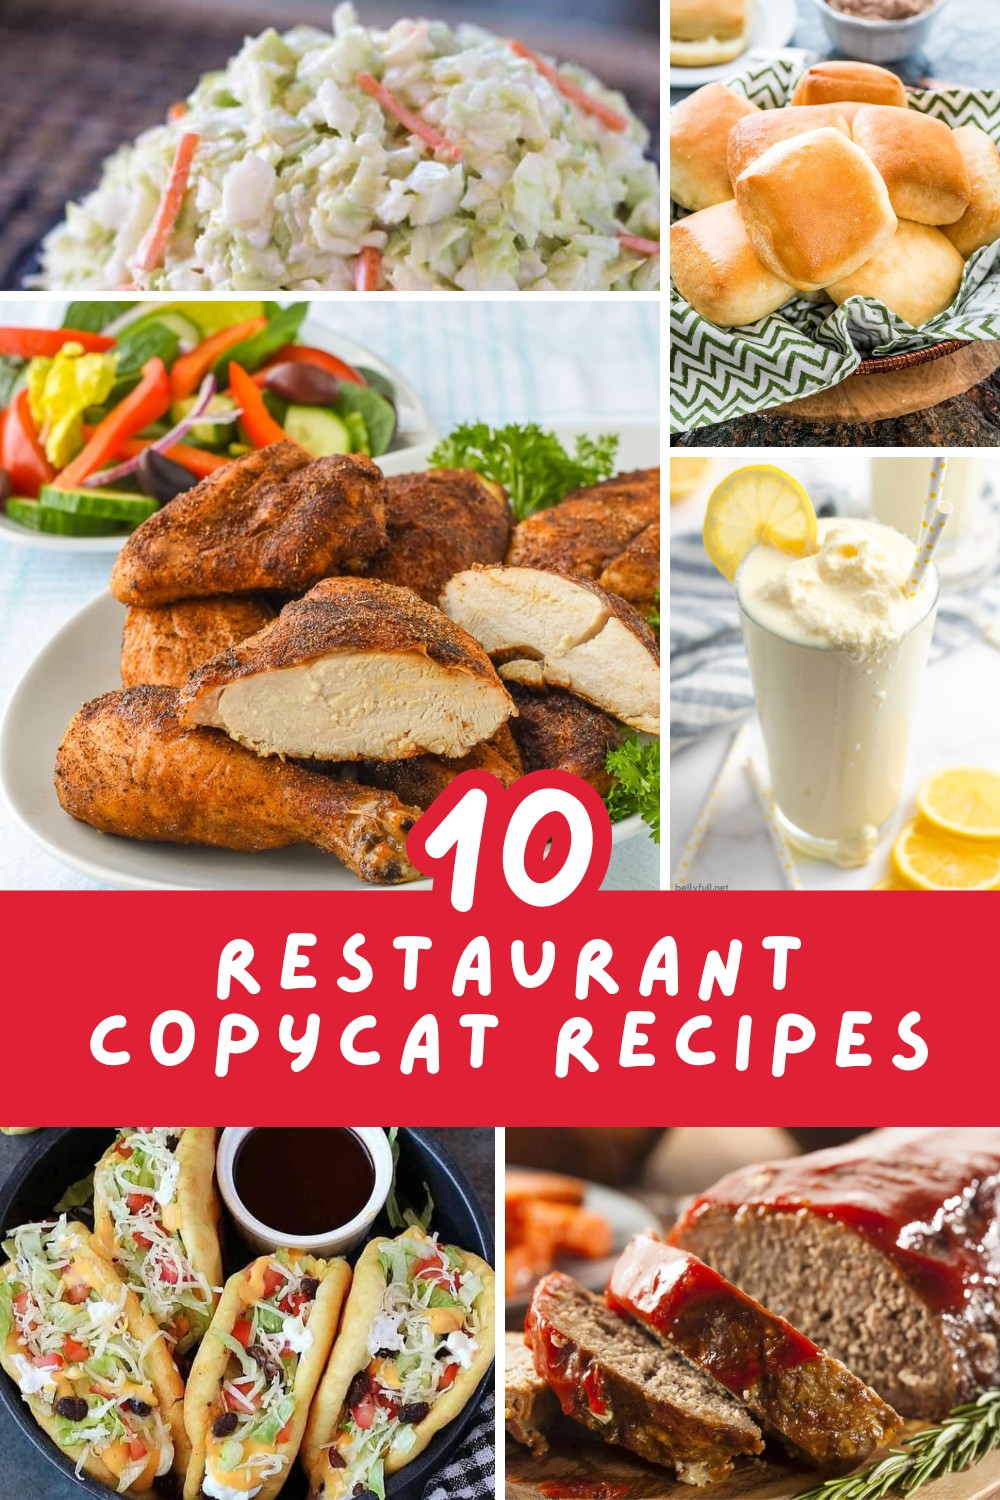 Craving your favorite restaurant dishes at home? Try these 10 amazing copycat recipes! From Chick-fil-A’s Frosted Lemonade to Panda Express’s Chow Mein and Texas Roadhouse Rolls, you’ll be cooking like a pro in no time. 🏠🍴 #CopycatRecipes #FoodieFavorites